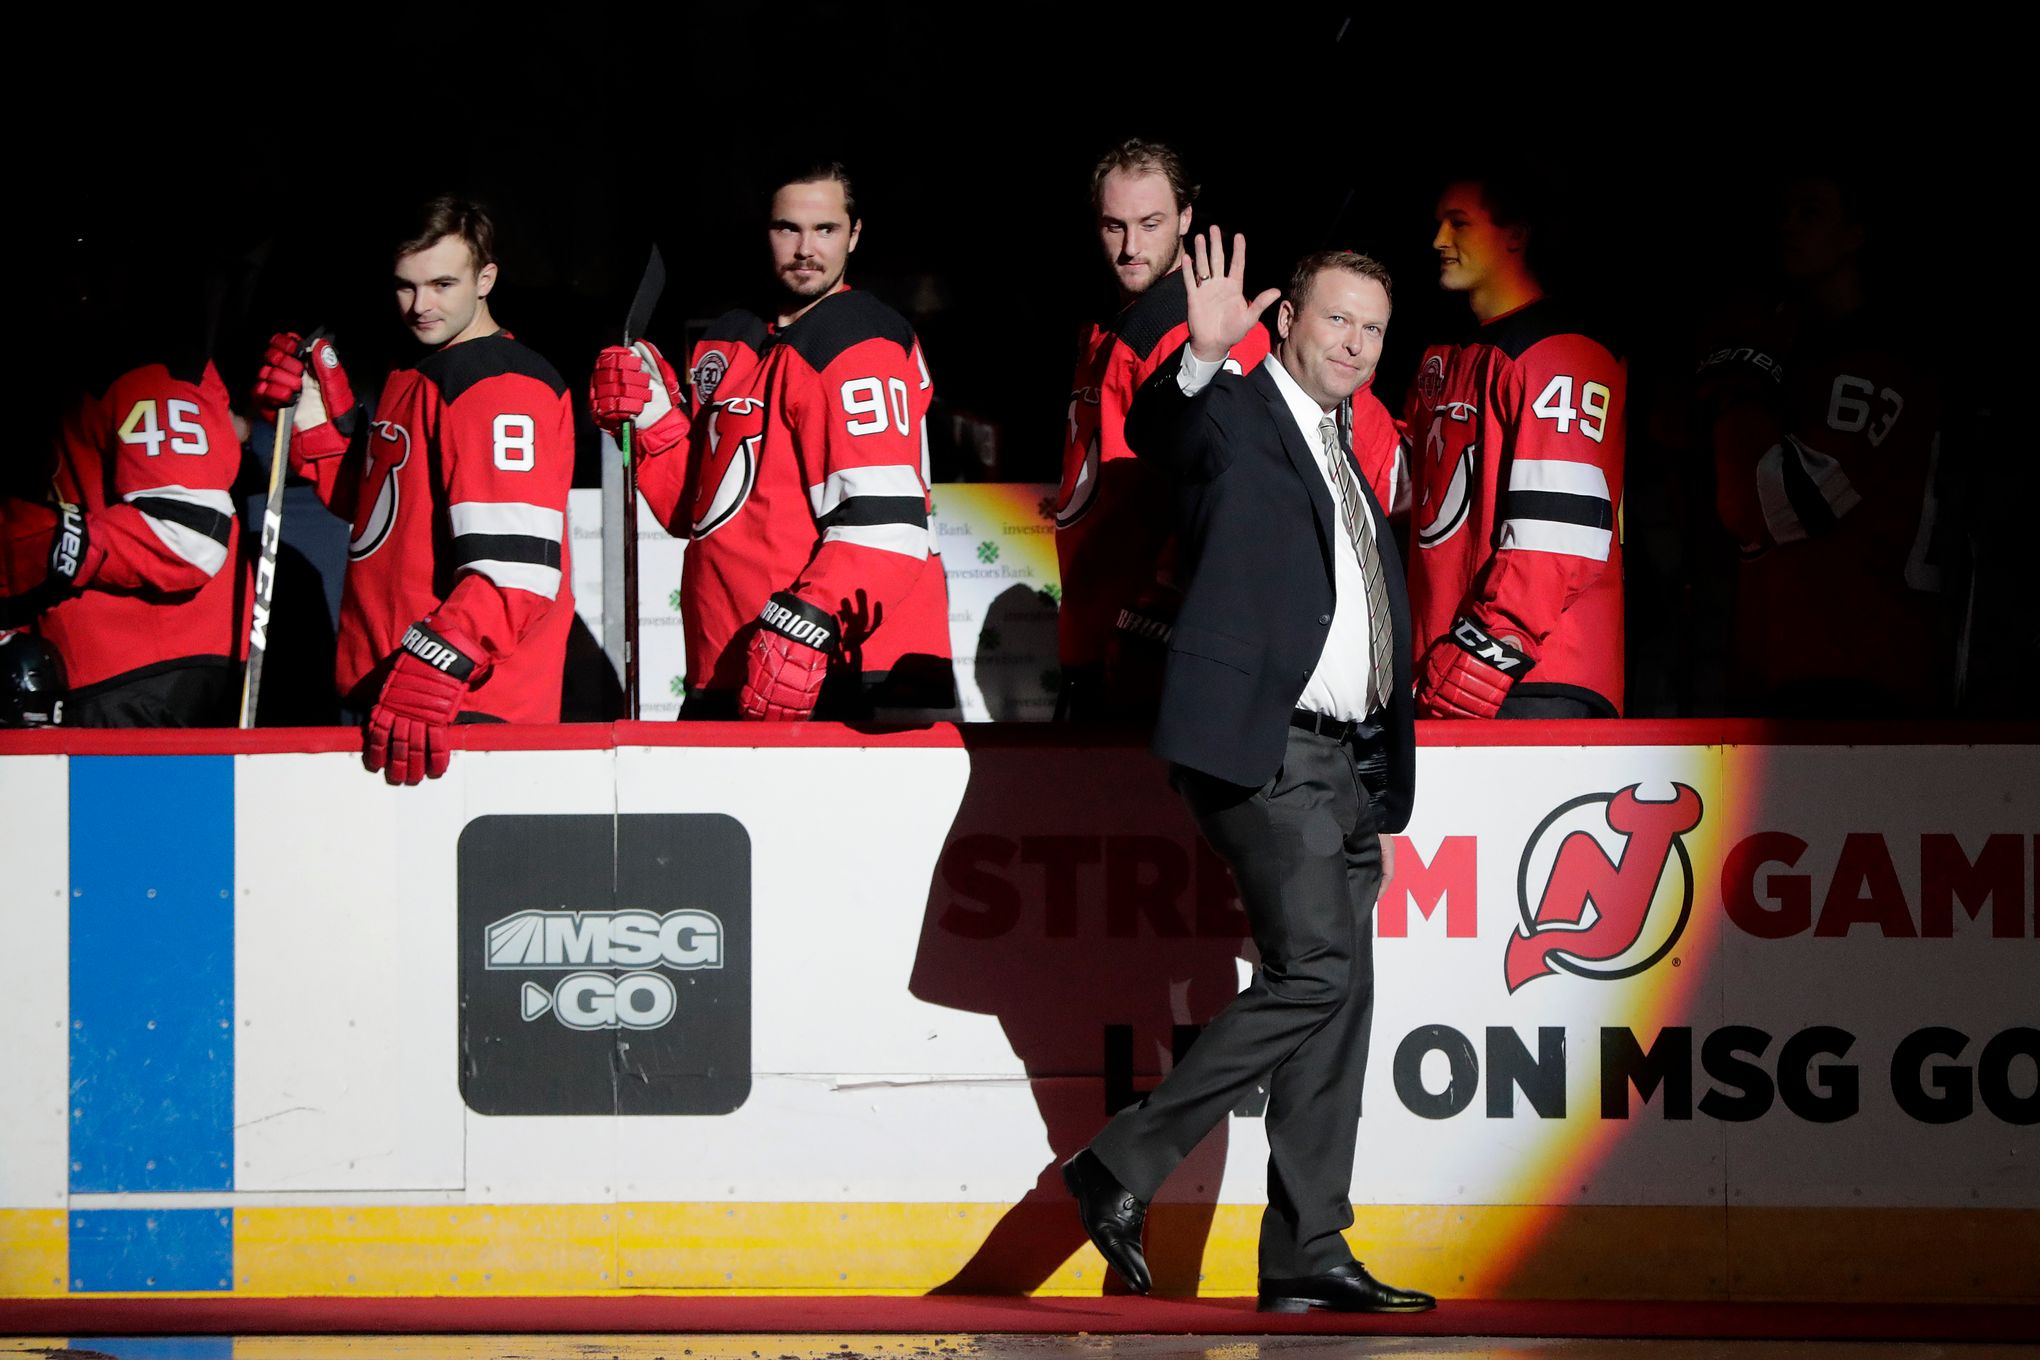 Martin Brodeur to retire, join St. Louis Blues' front office